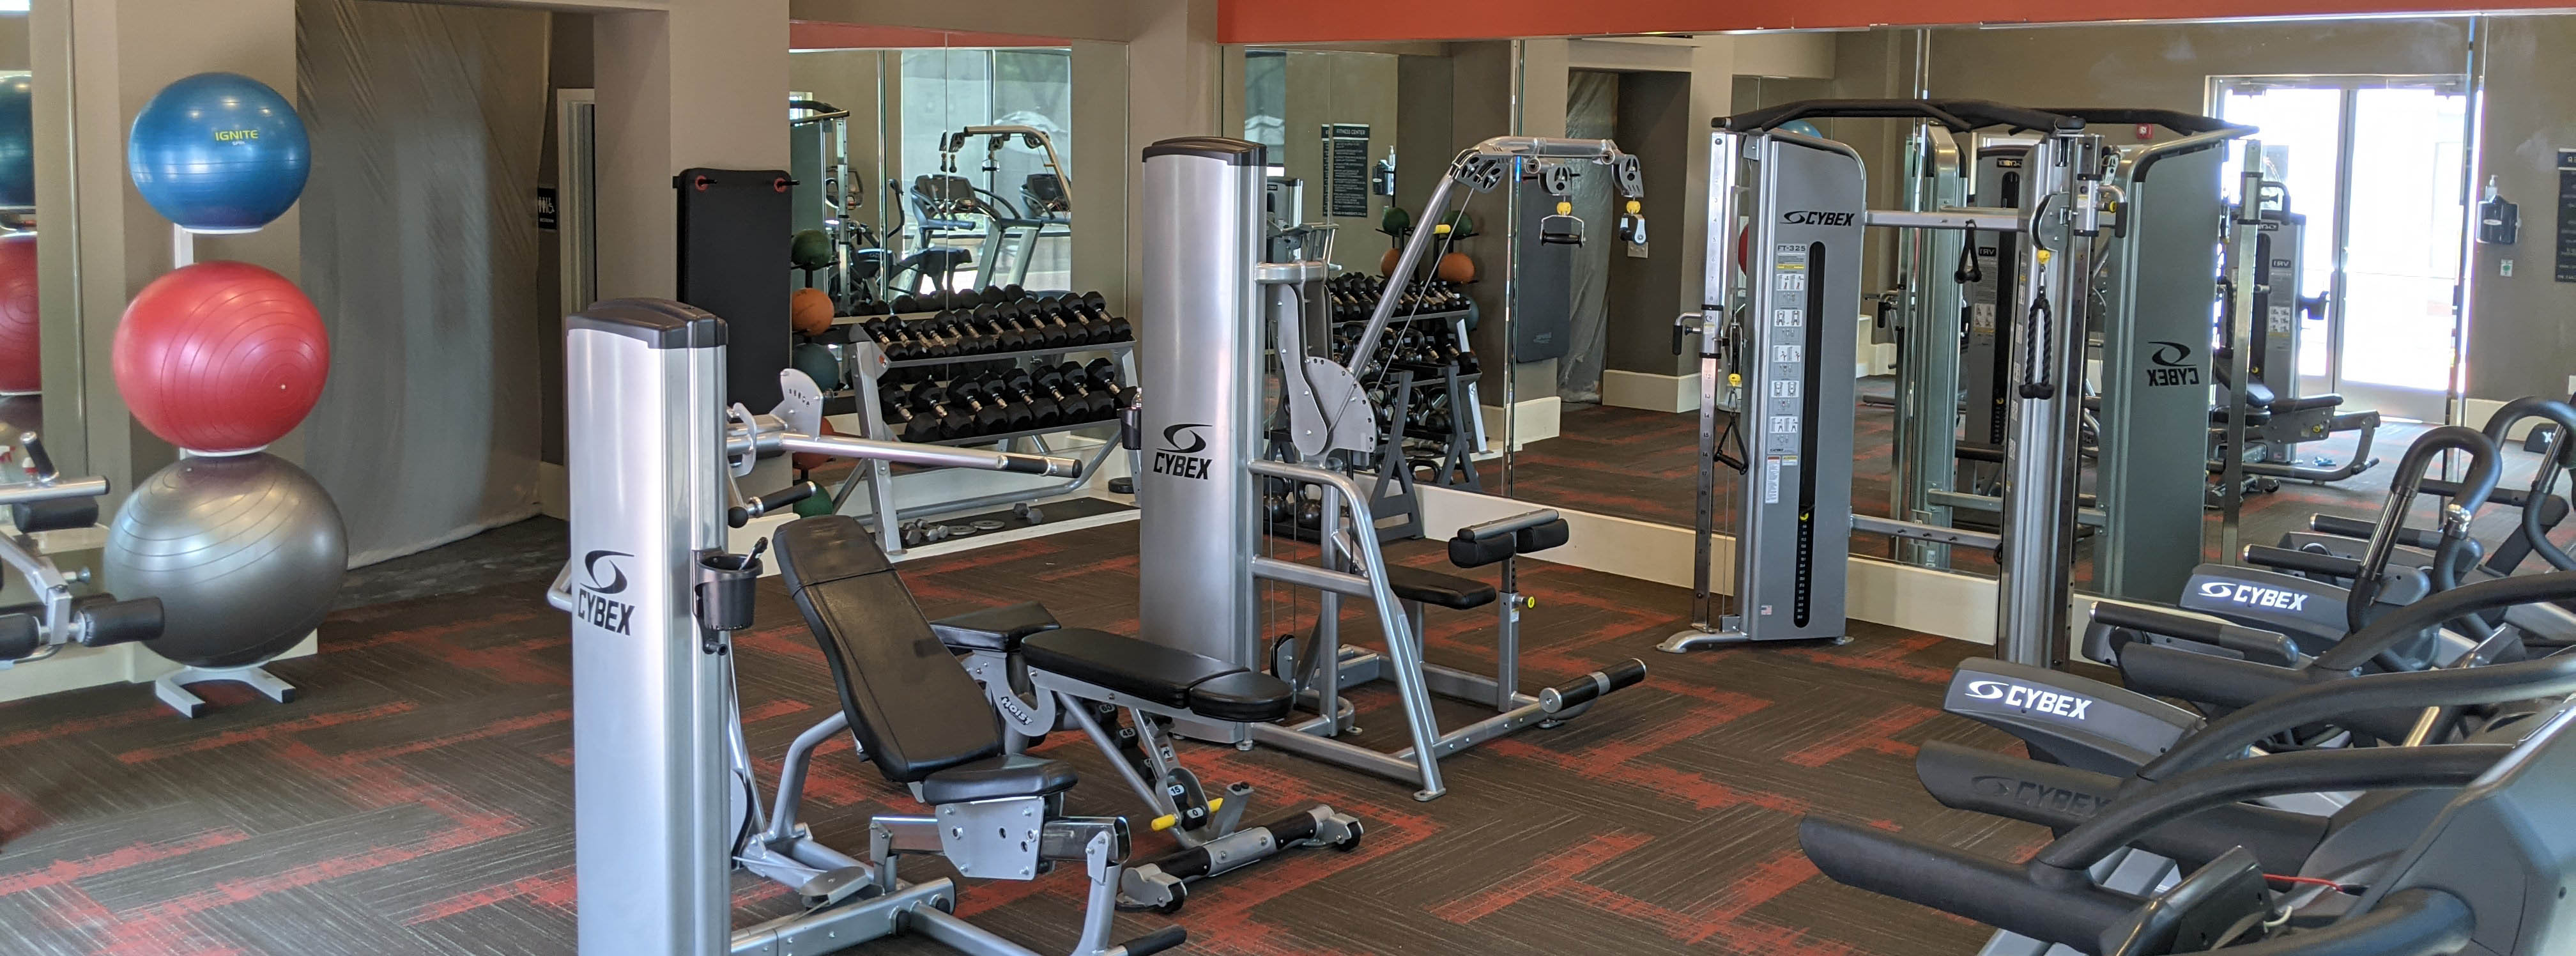 Fully equipped fitness centeer with treadmills, elipticals, weight machines, etc